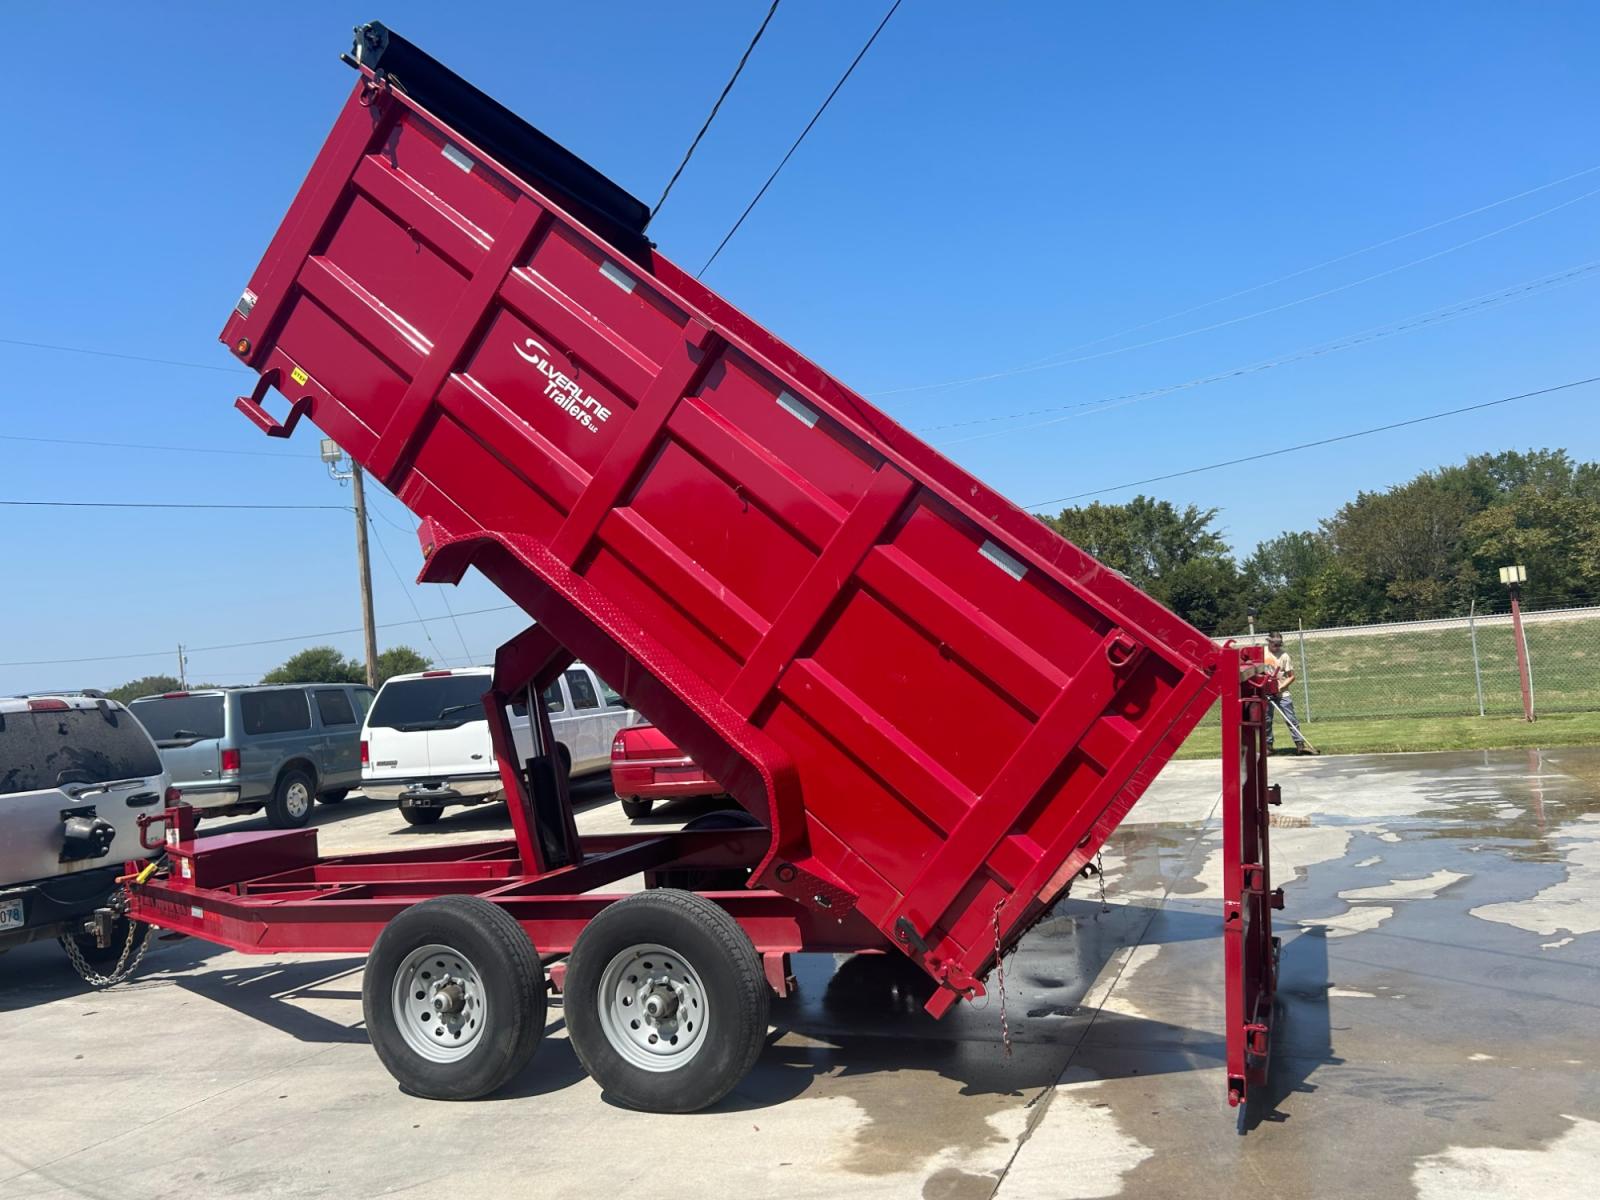 2022 RED EAST TEXAS TRAILER DUMPBED (58SBD1420NE) , located at 17760 Hwy 62, Morris, OK, 74445, 35.609104, -95.877060 - 2022 SILVERLINE TRAILER 83X14 FEATURES 2 7,000 LB DEXTER SPRING AXLES, 2 ELEC FSA BRAKES, COUPLER 2-5/16" ADJUSTABLE (6 HOLE), DIAMOND PLATE FENDERS, 16" CROSS-MEMBERS, 48" DUMP SIDES, 48" 3 WAY GATE, MESH ROLL TARP SYSTEM, JACK SPRING LOADED DROP LEG, 4 3'' D-RINGS, TOOL BOX IN TONGUE, SCISSOR HOIS - Photo #9